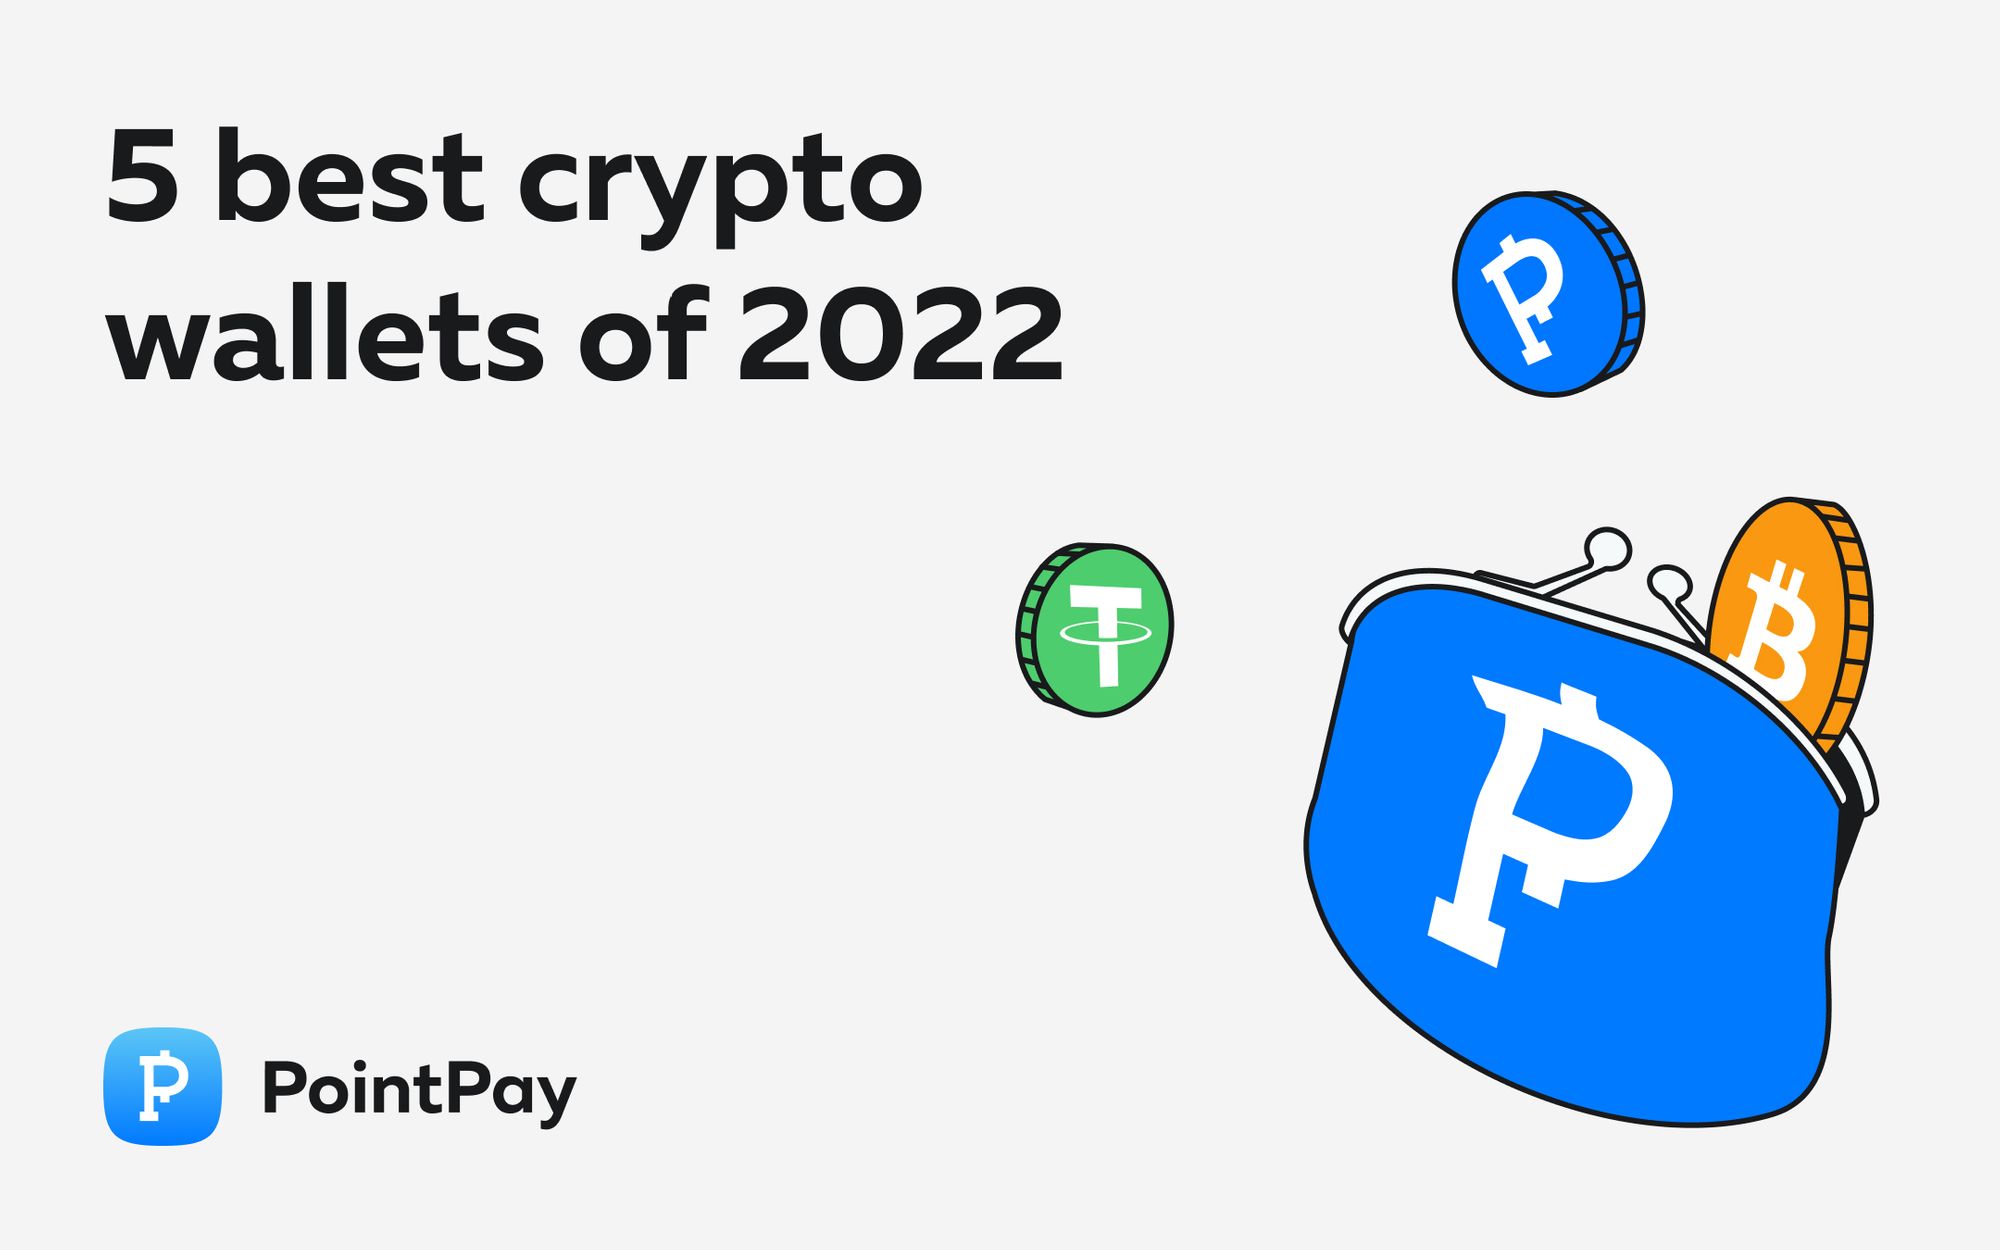 PointPay: 5 Best Crypto Wallets of 2022